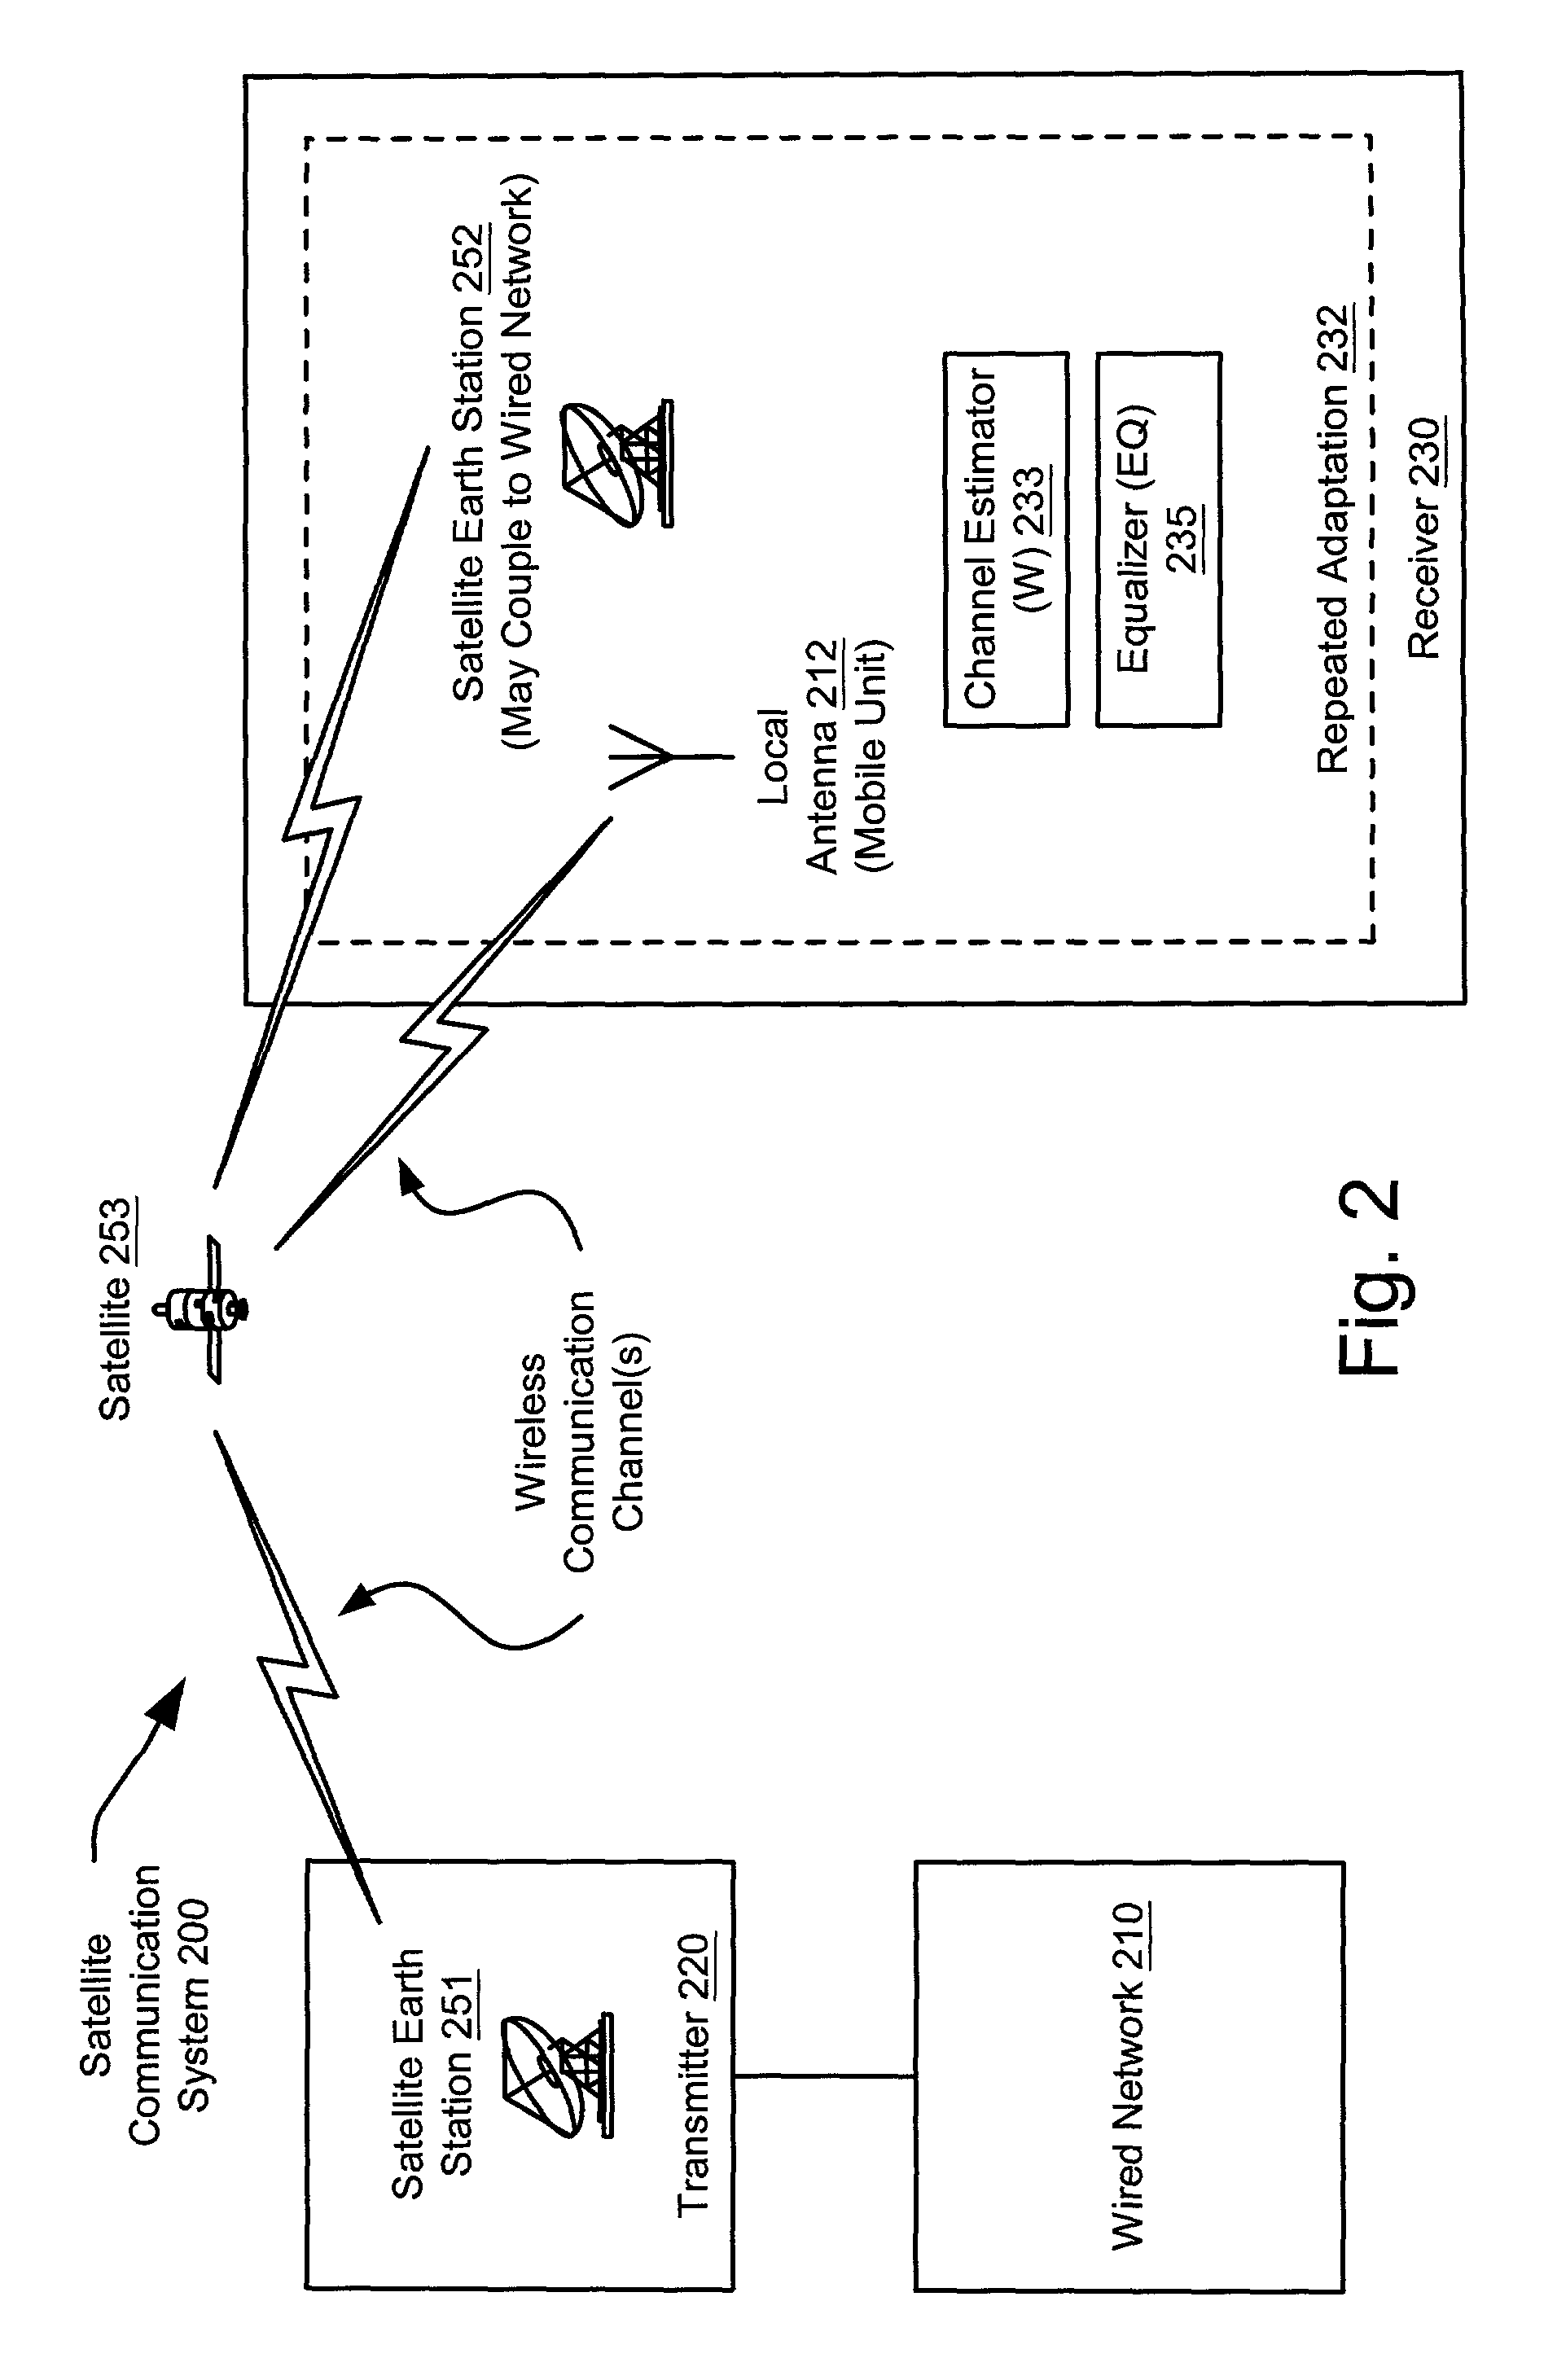 Channel estimation and/or equalization using repeated adaptation